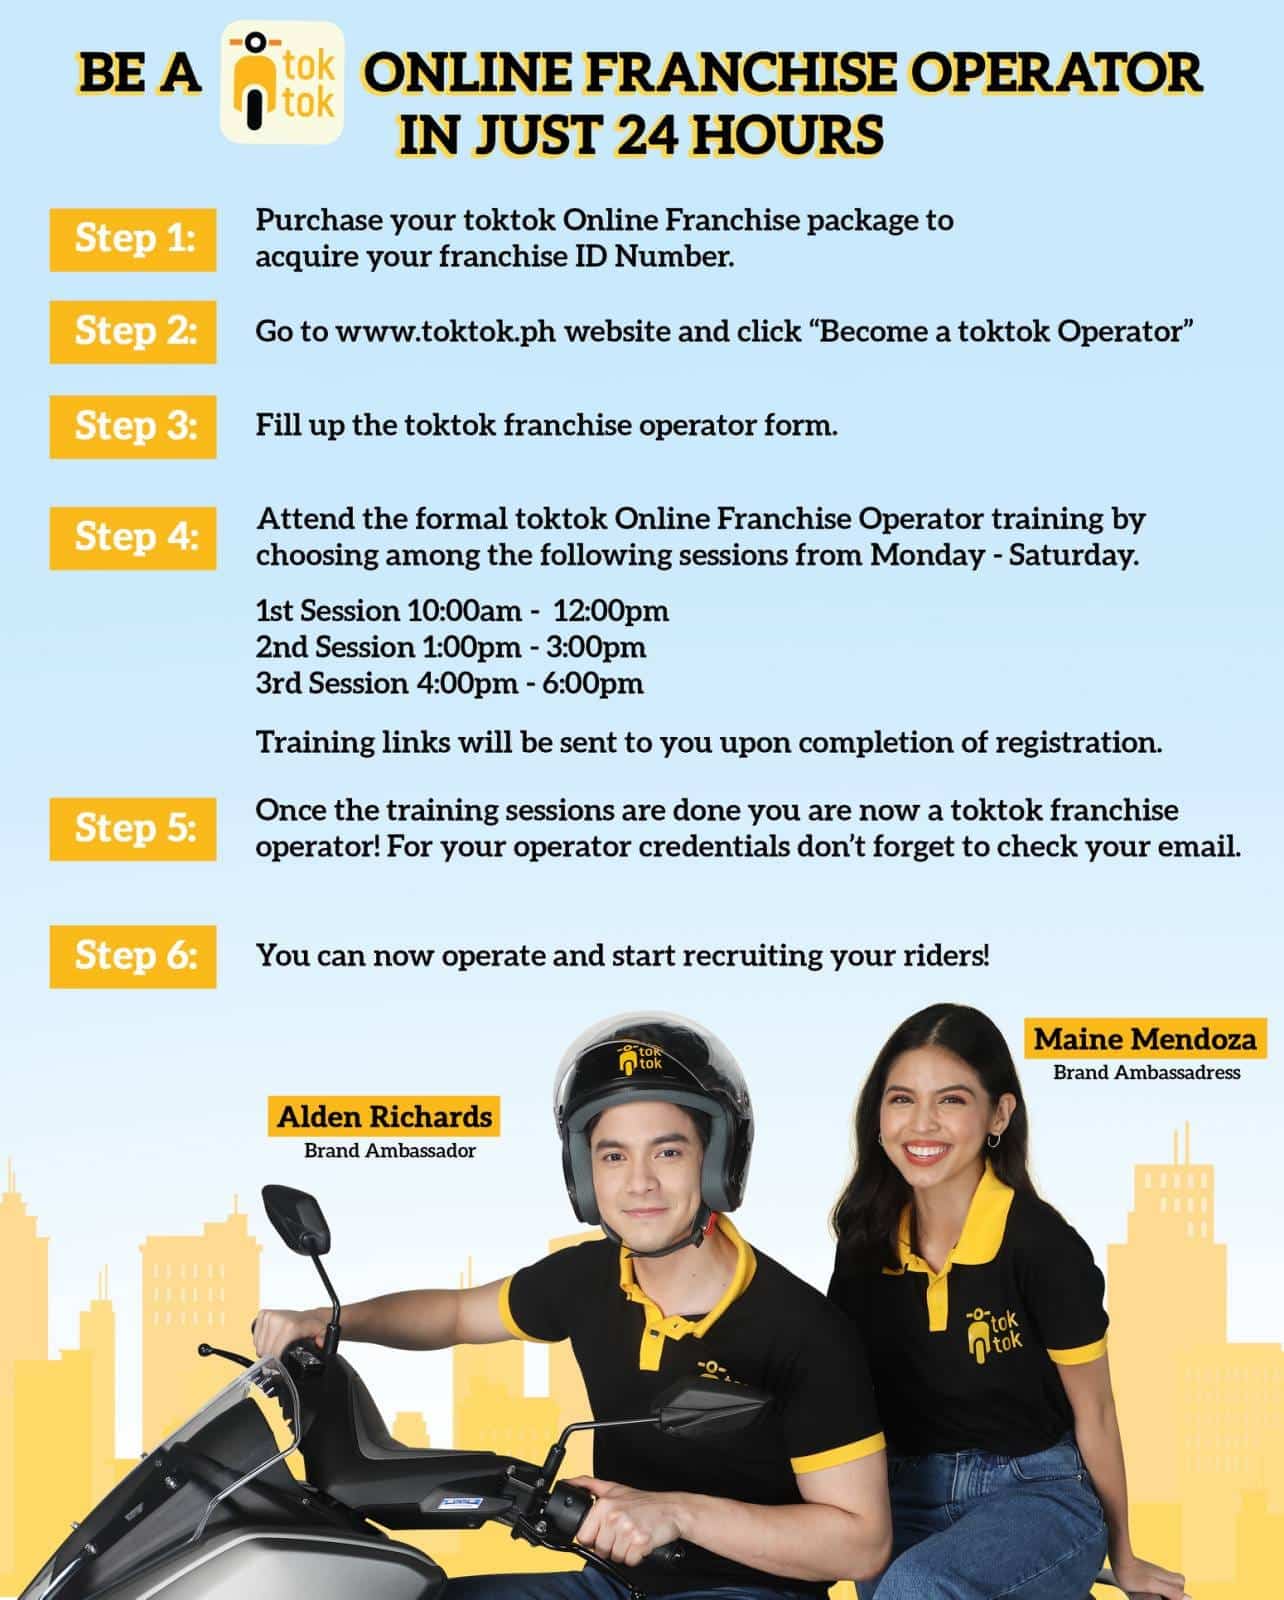 How to be a Toktok Franchise Operator?